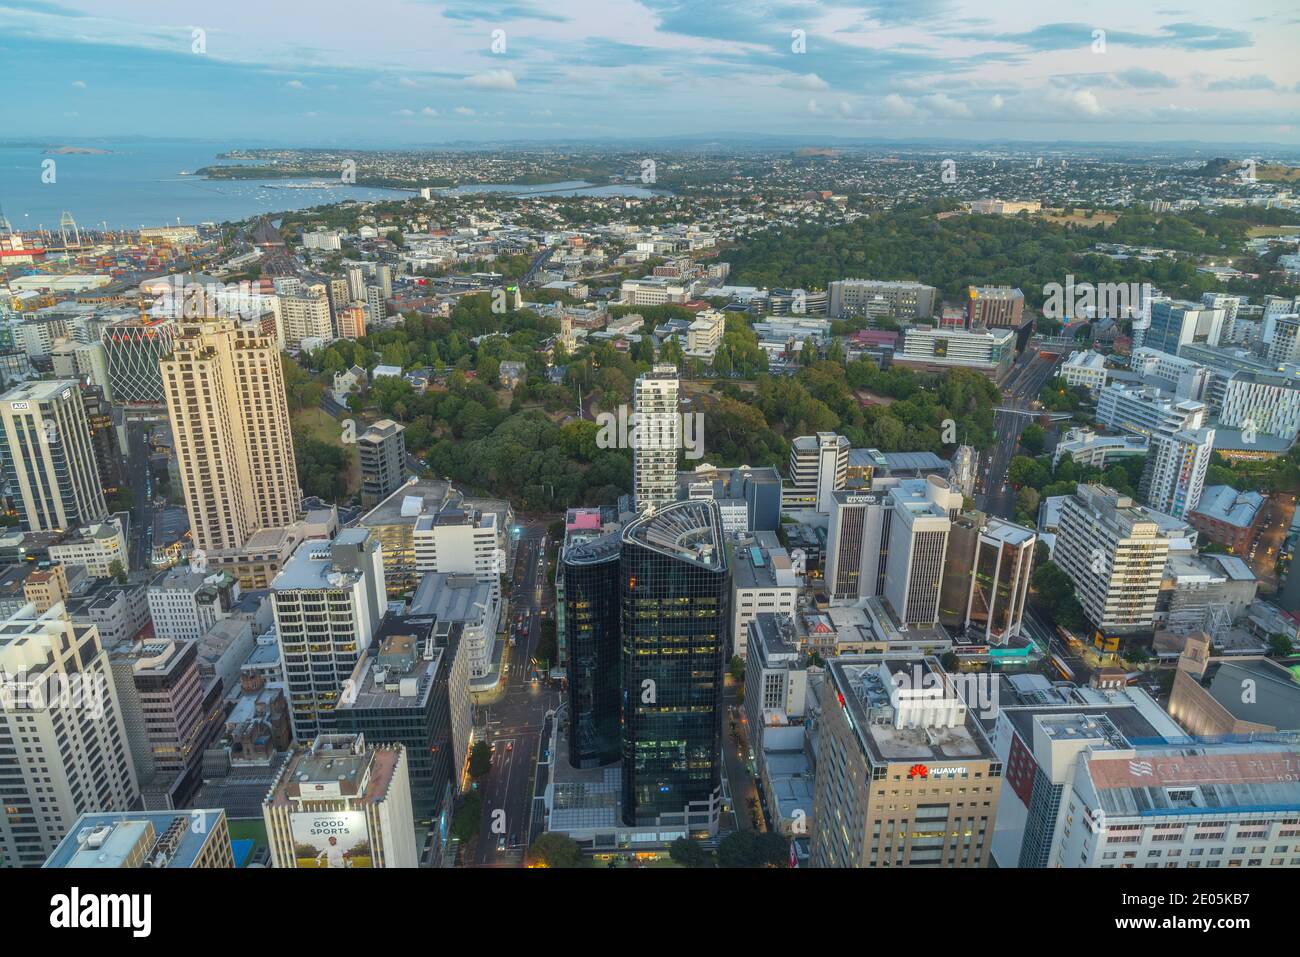 AUCKLAND, NEW ZEALAND, FEBRUARY 19, 2020: Night aerial view of war memorial museum and downtown Auckland from Sky tower, New Zealand Stock Photo